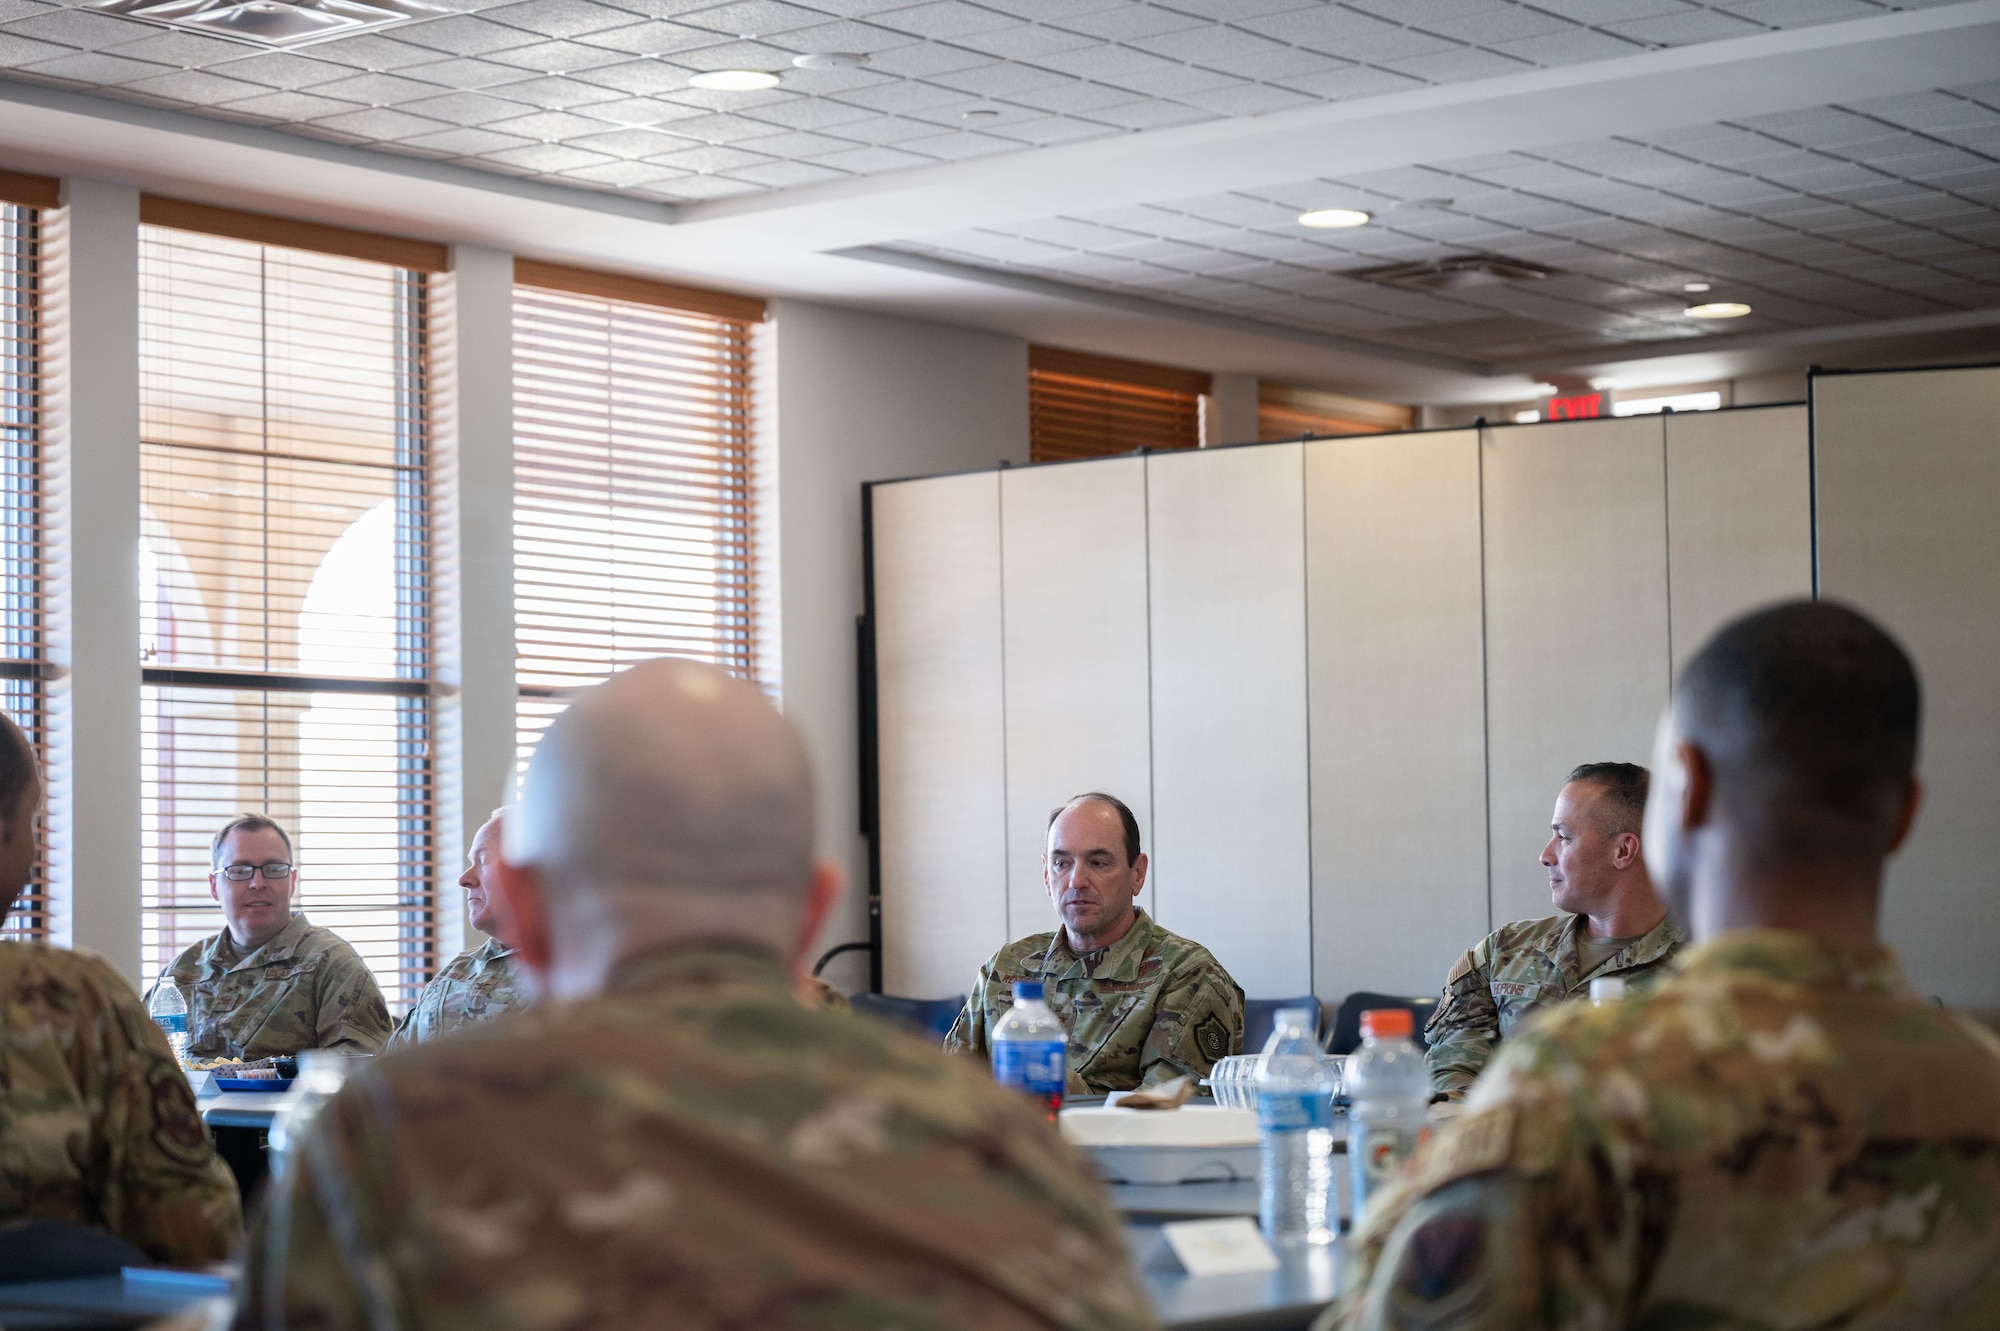 A group of men in military uniform sit around a conference table.